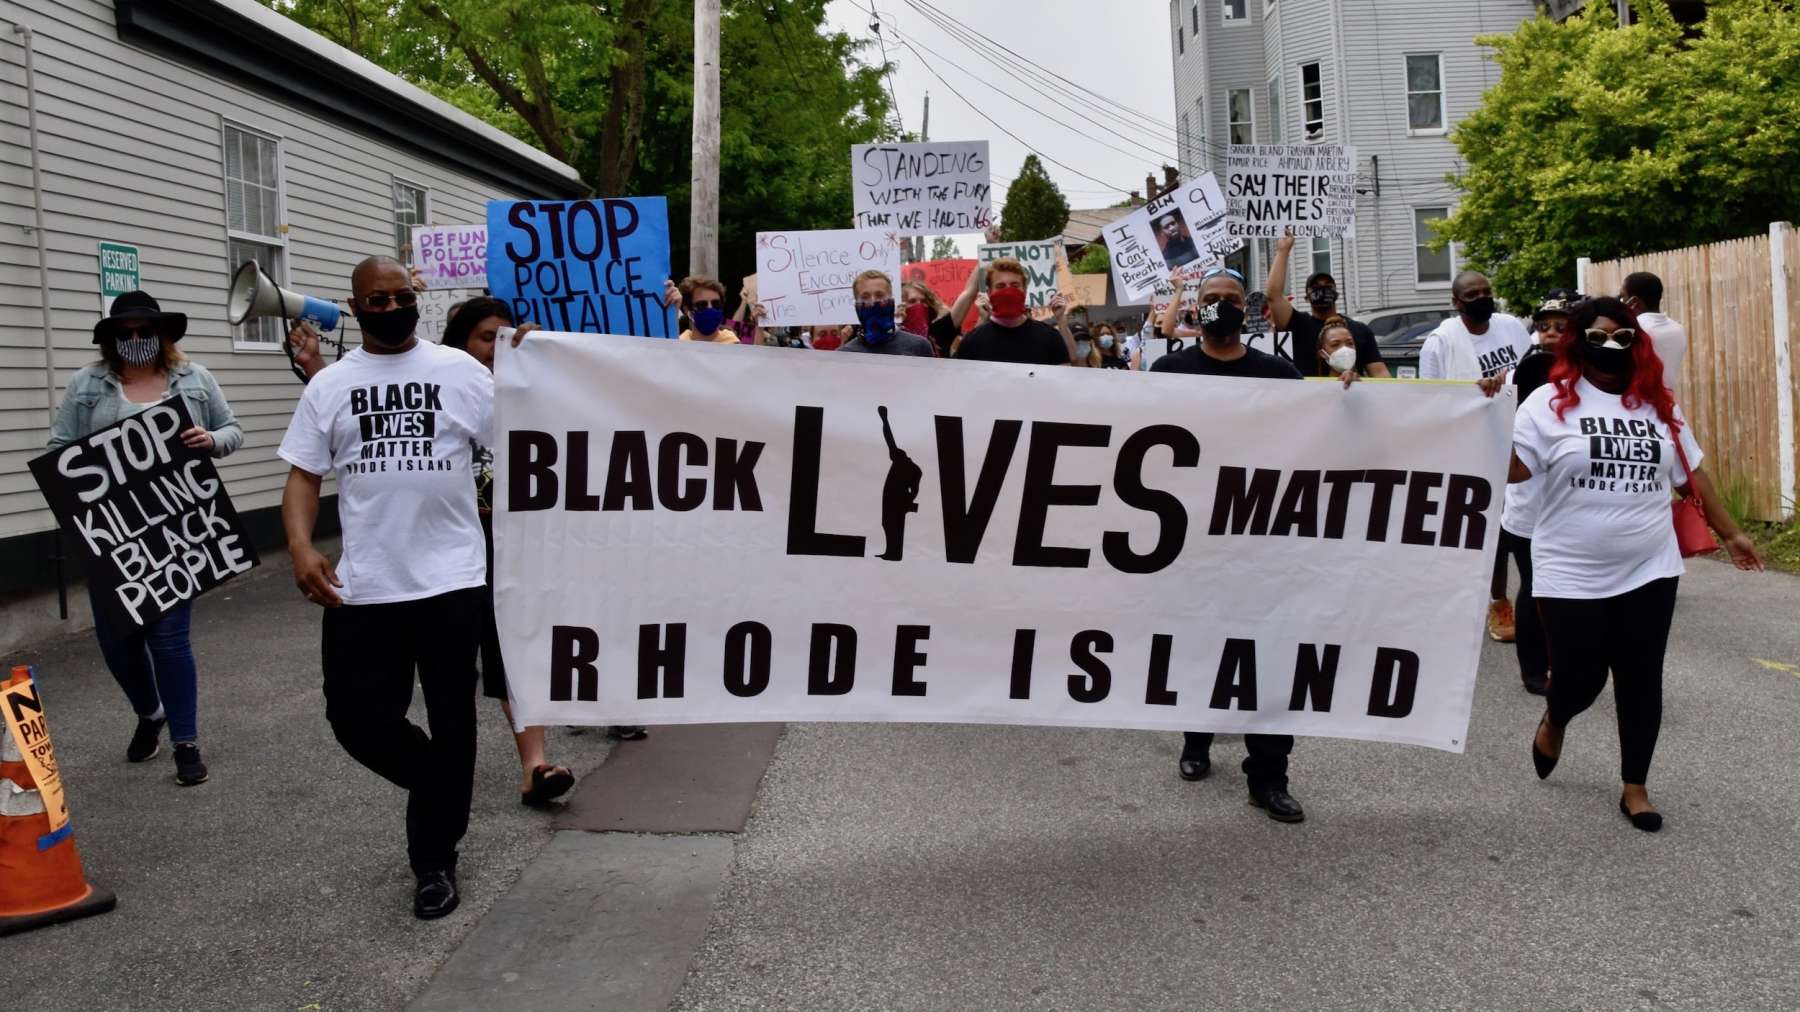 Rhode Island News: Black Lives Matter RI in Newport: Thousands rally against police violence